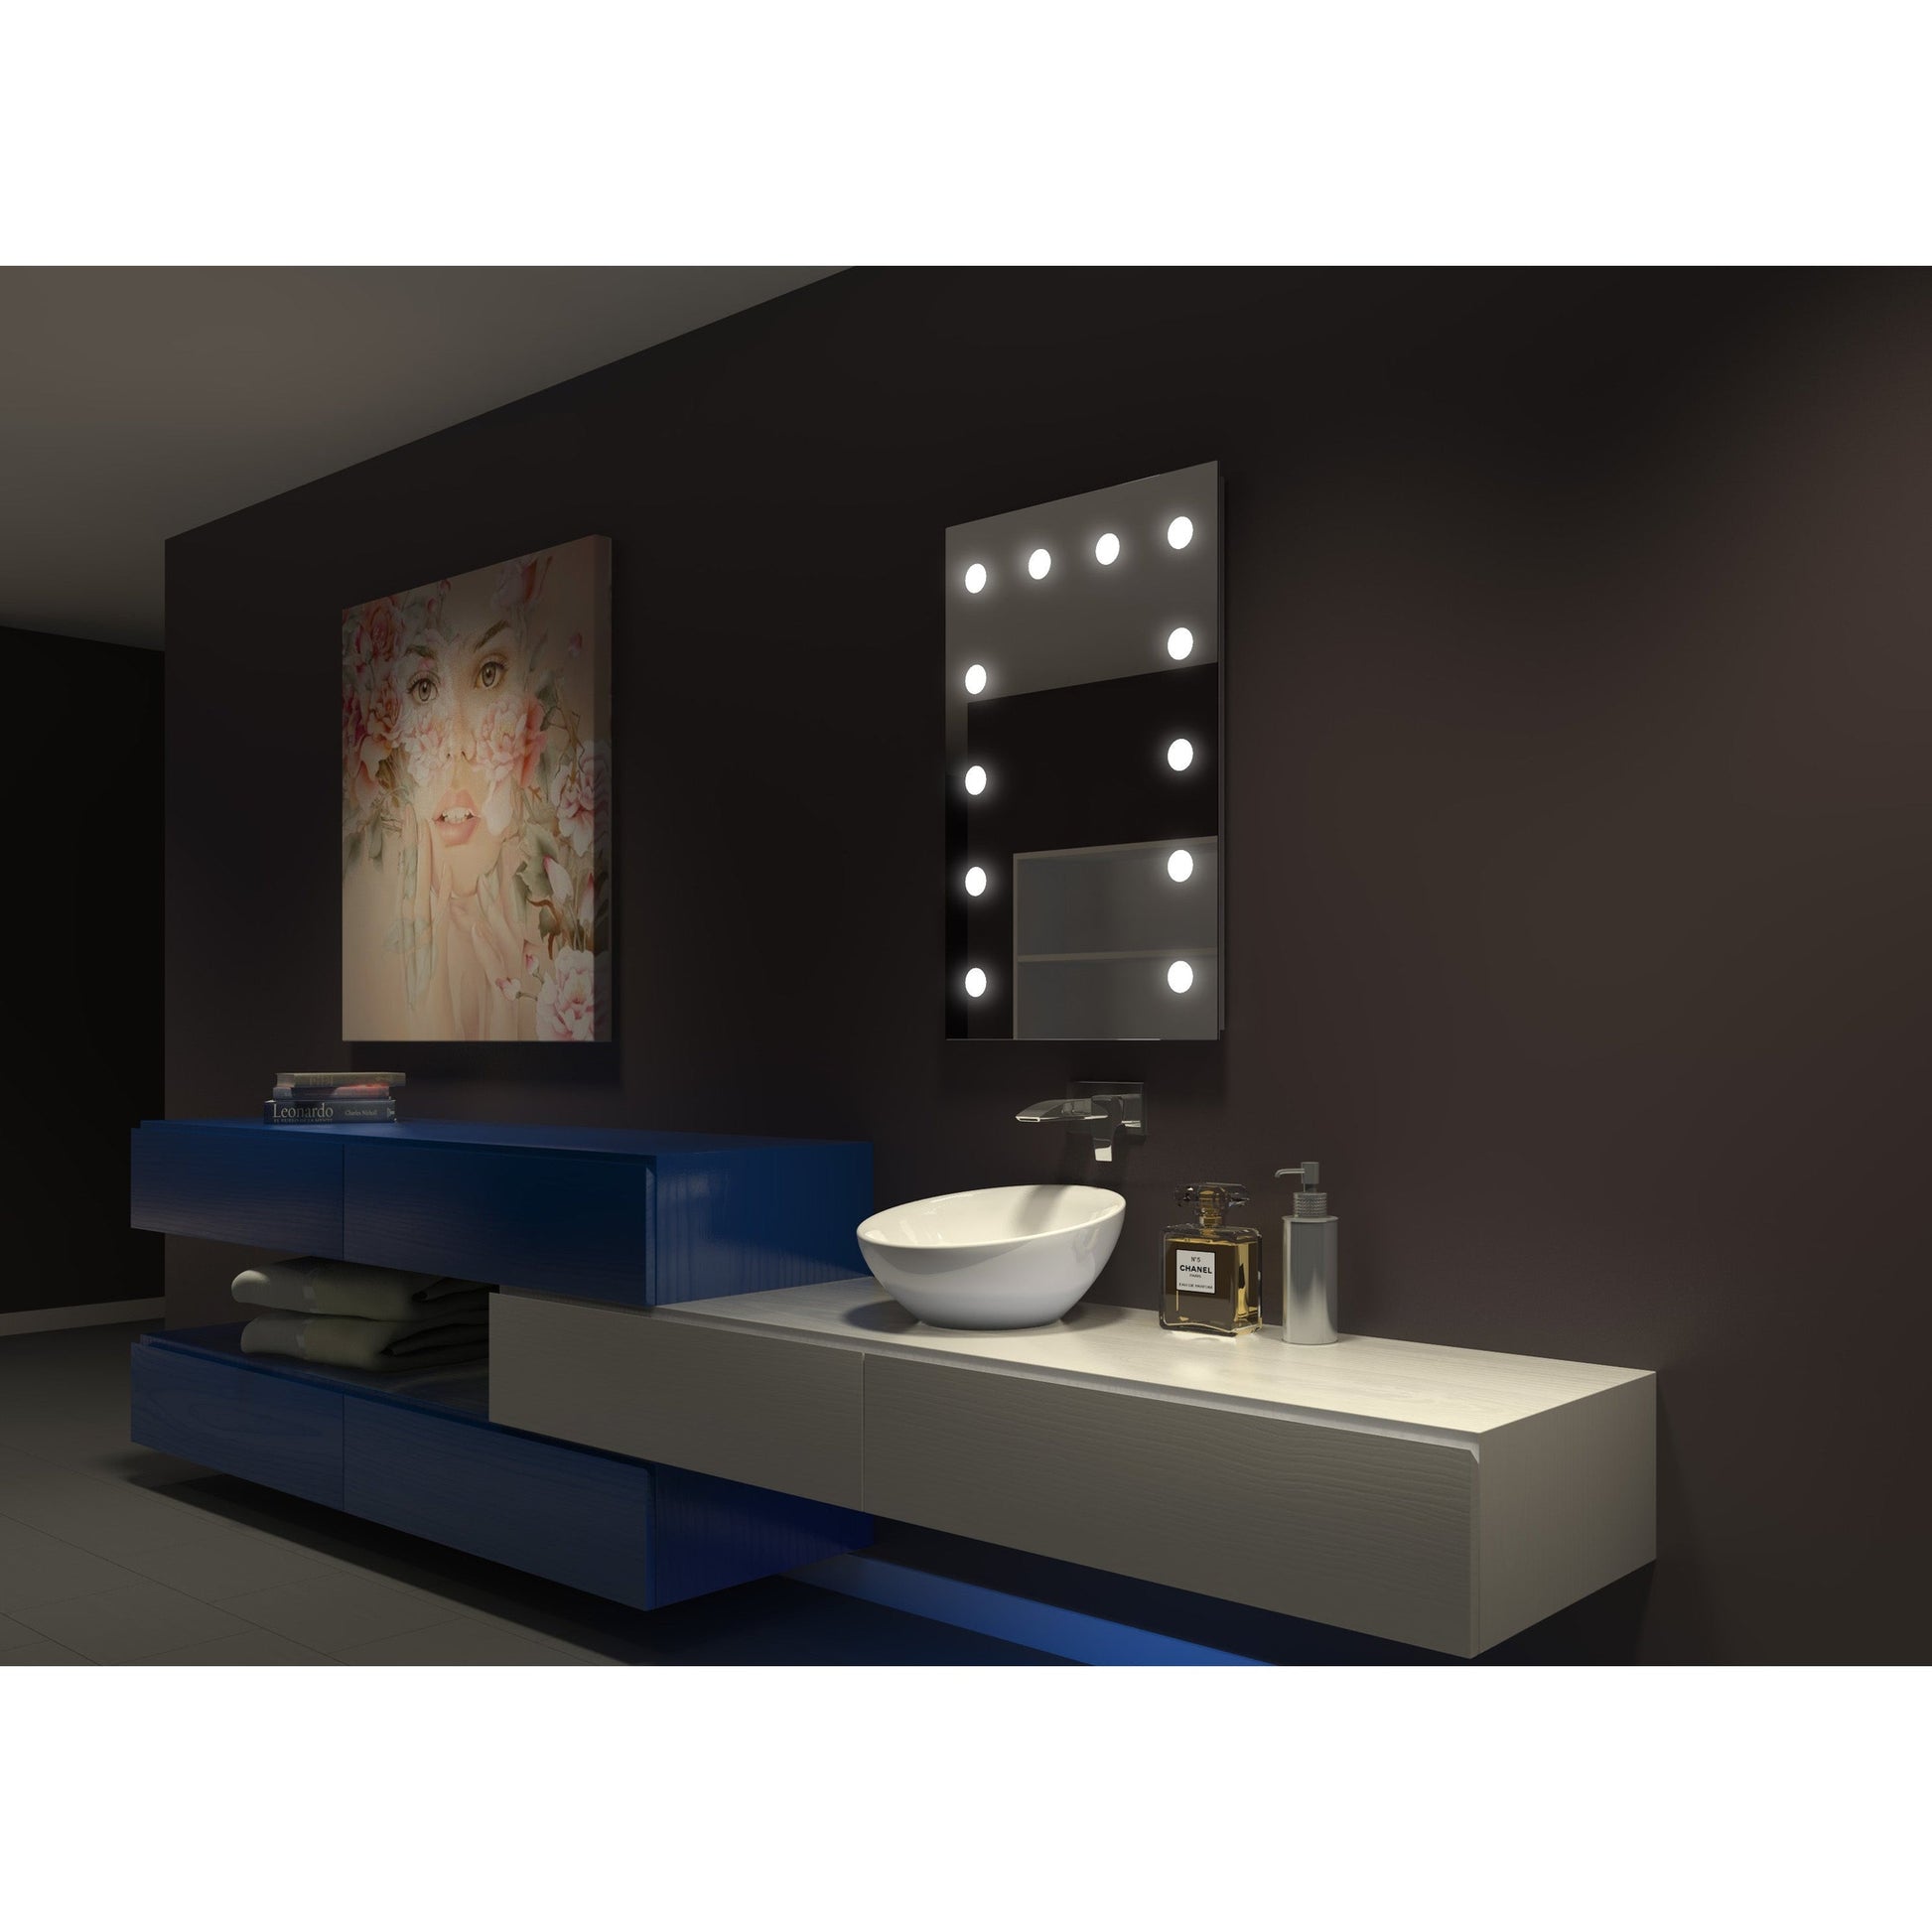 Paris Mirror Hollywood 24" x 36" Front-Lit Lighted Super Bright Dimmable Wall-Mounted 3000K LED Mirror